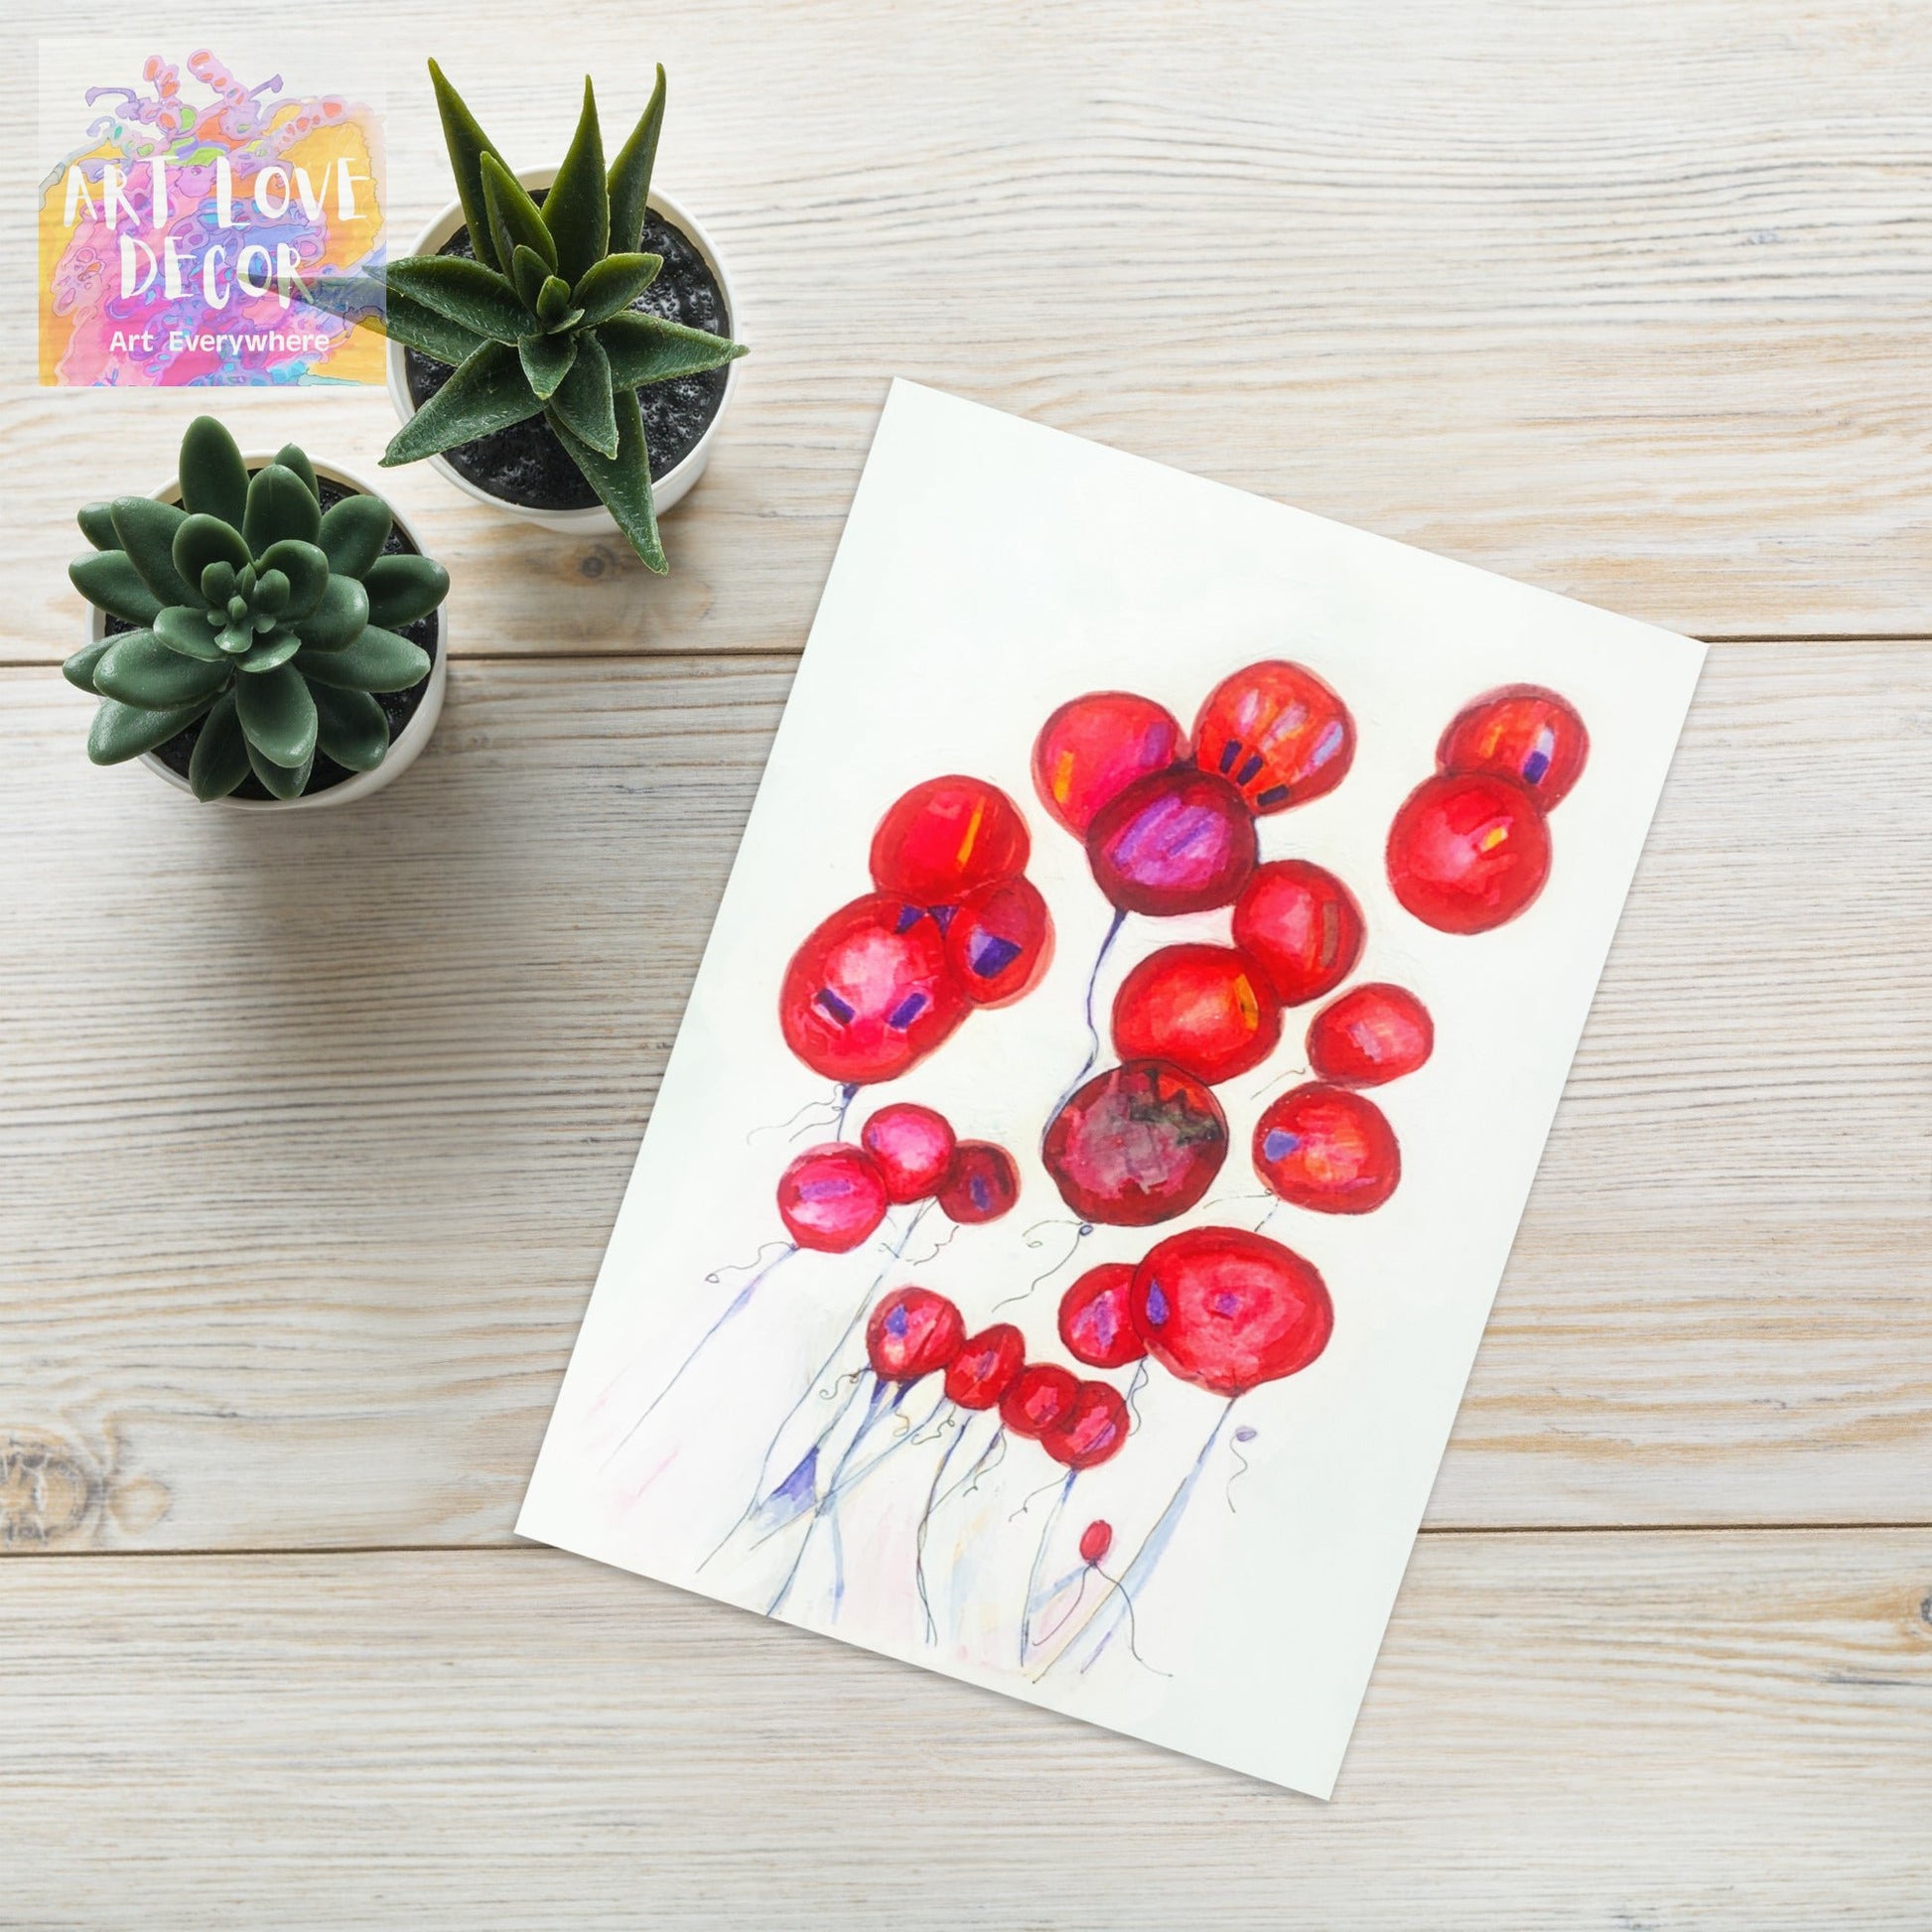 Red Balloons Abstract Greeting card - Art Love Decor